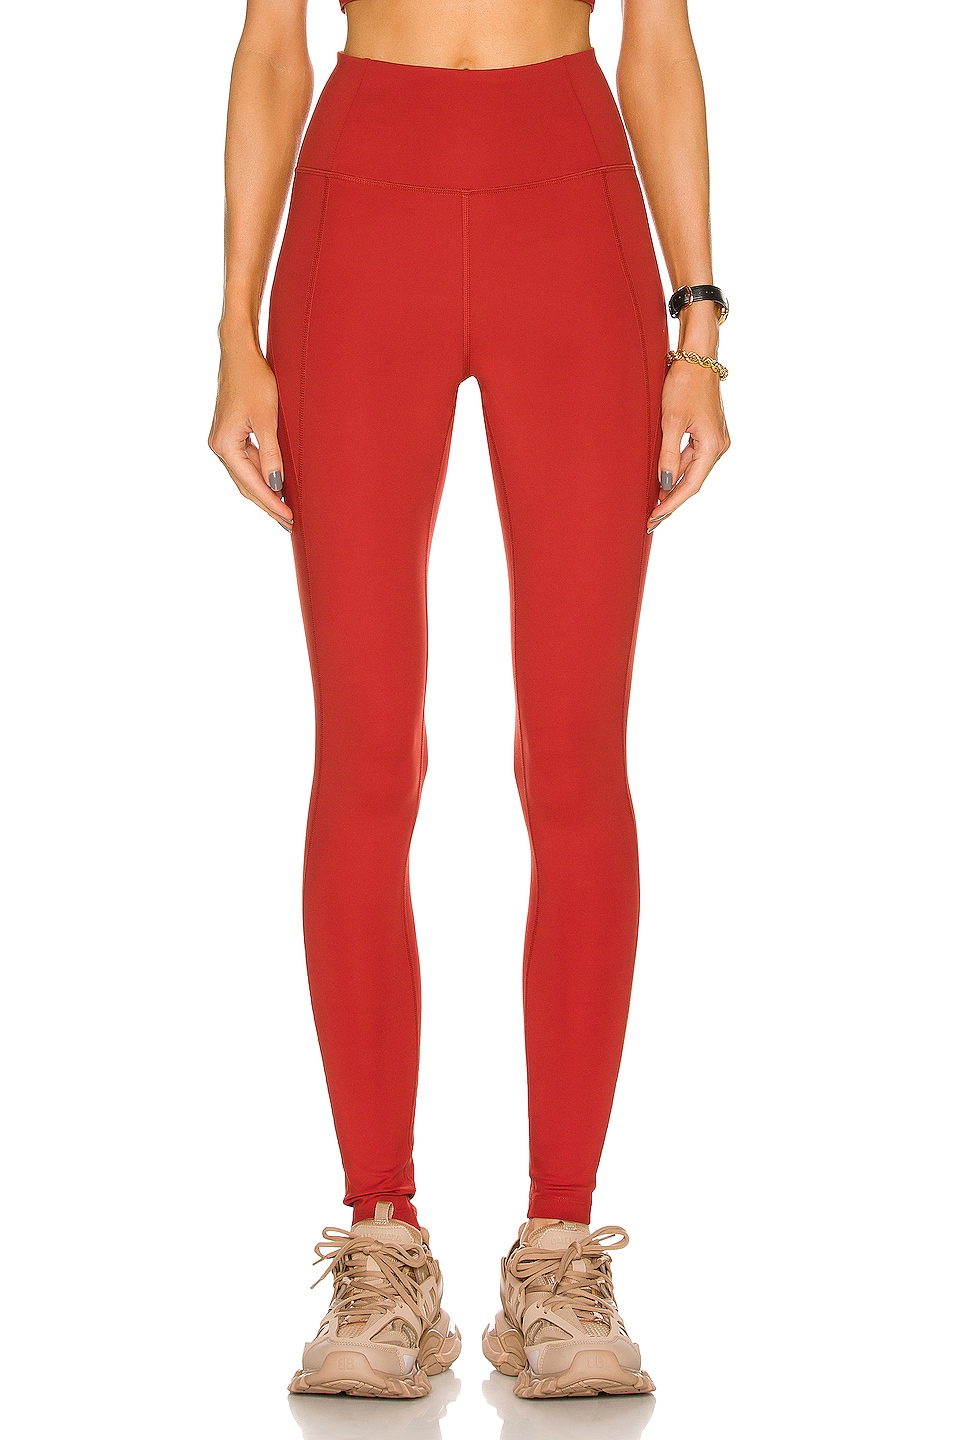 Image 1 of Girlfriend Collective High-Rise Compressive Legging in Ember